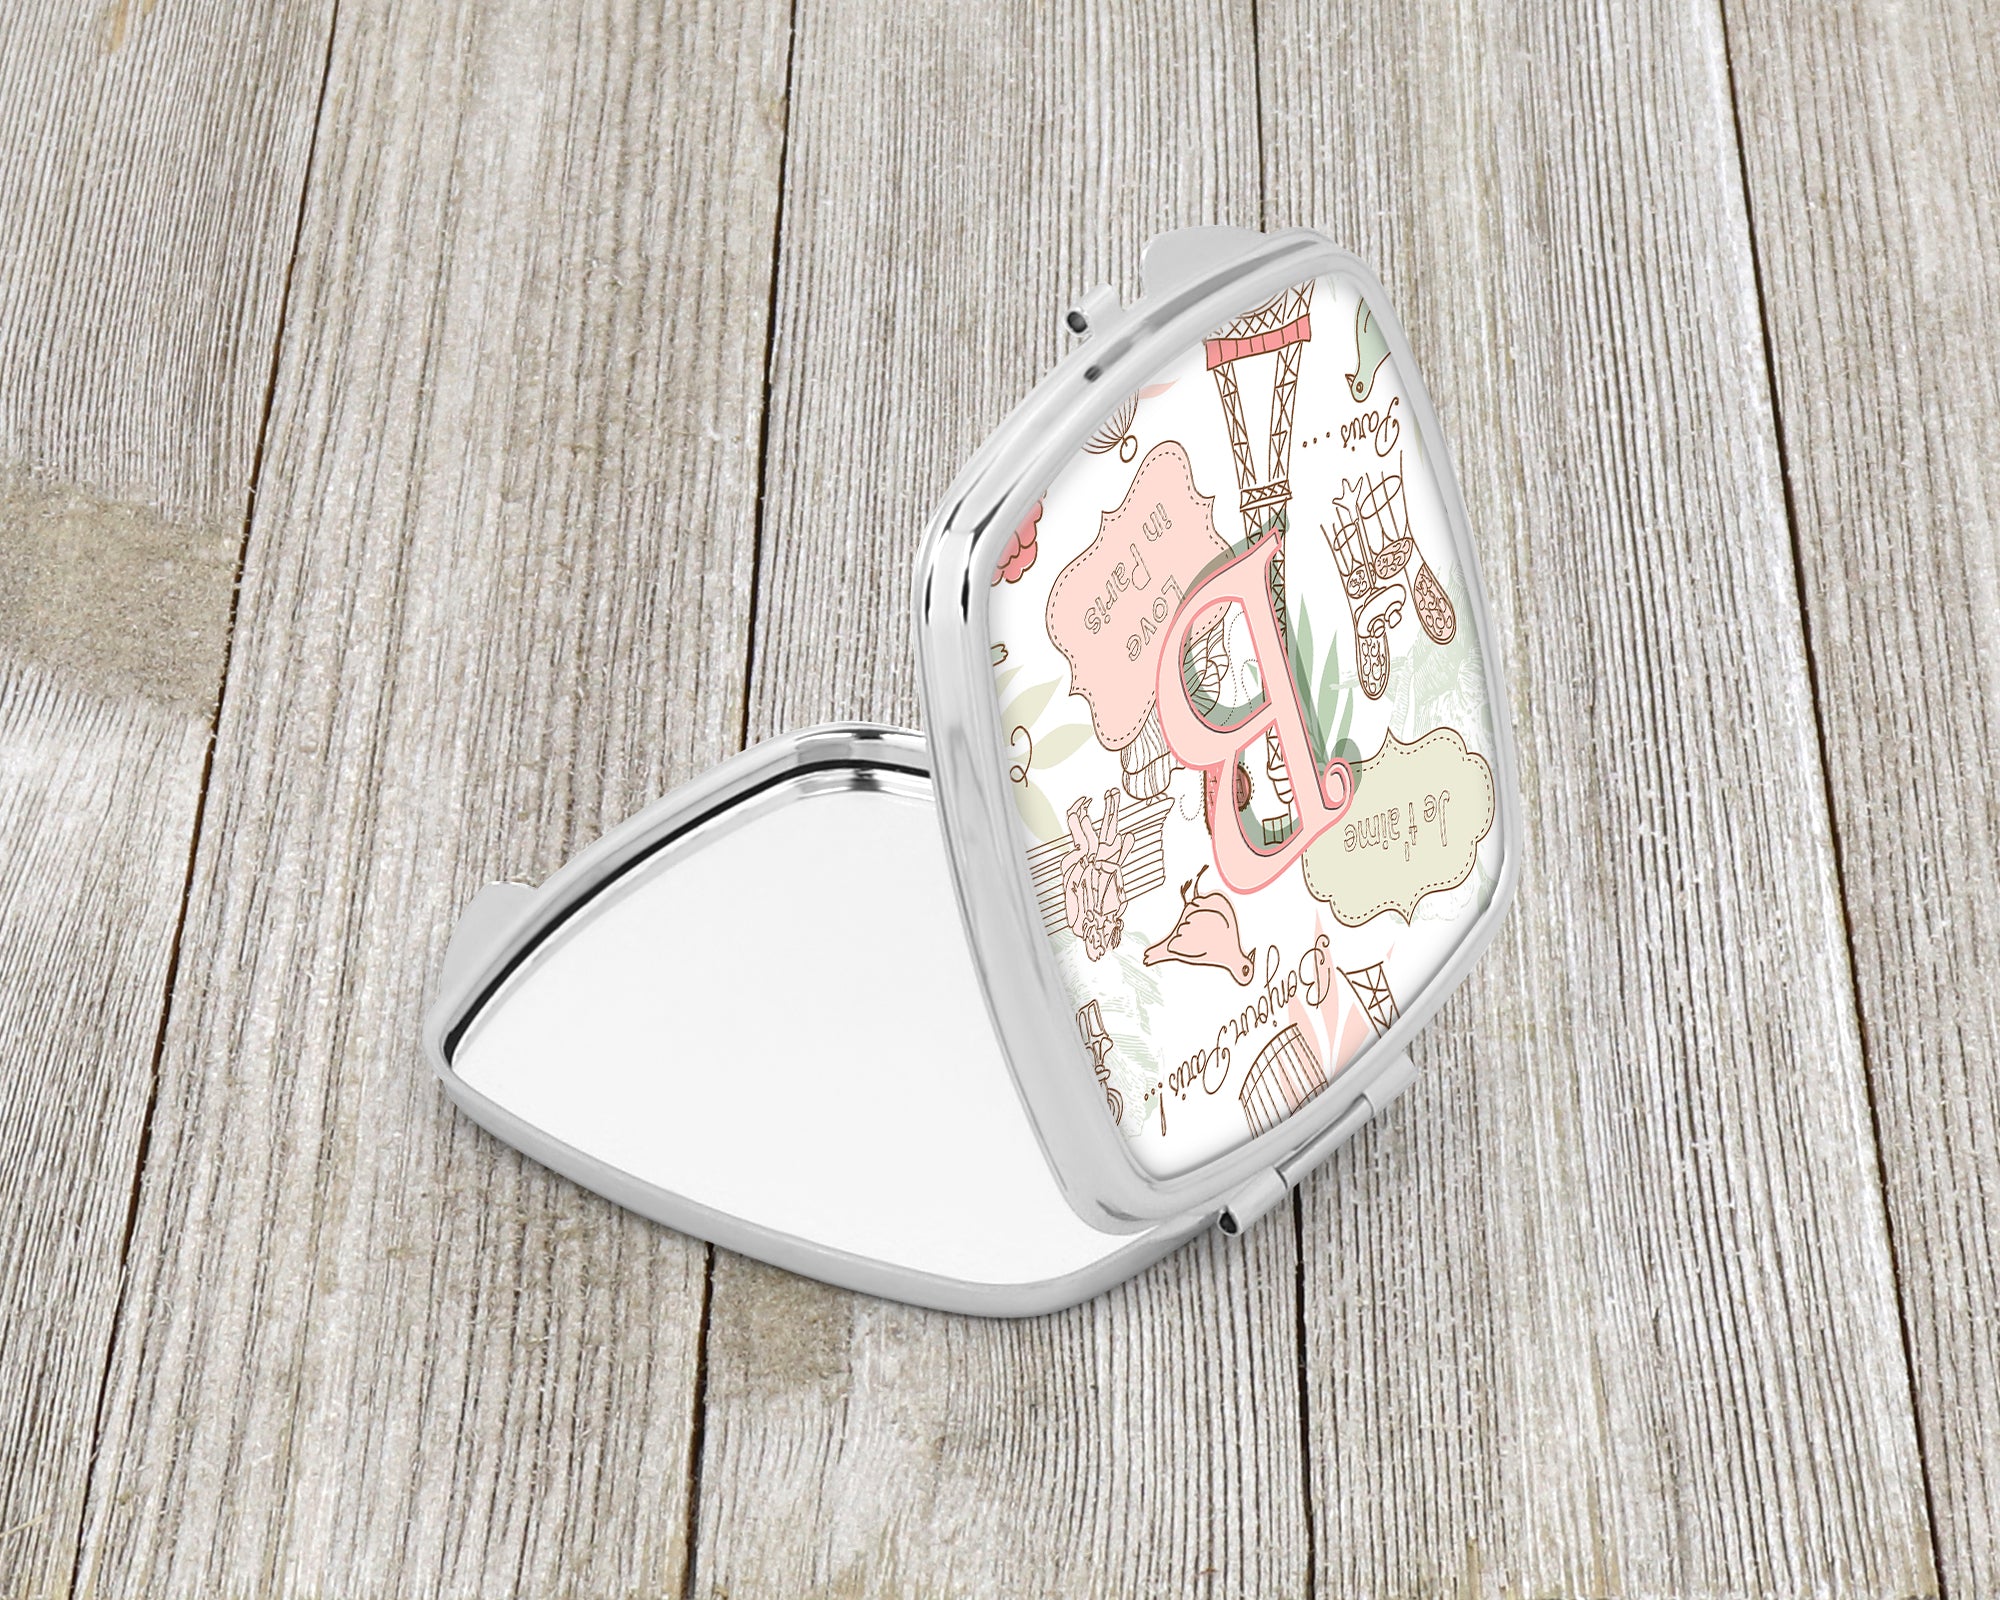 Letter B Love in Paris Pink Compact Mirror CJ2002-BSCM  the-store.com.